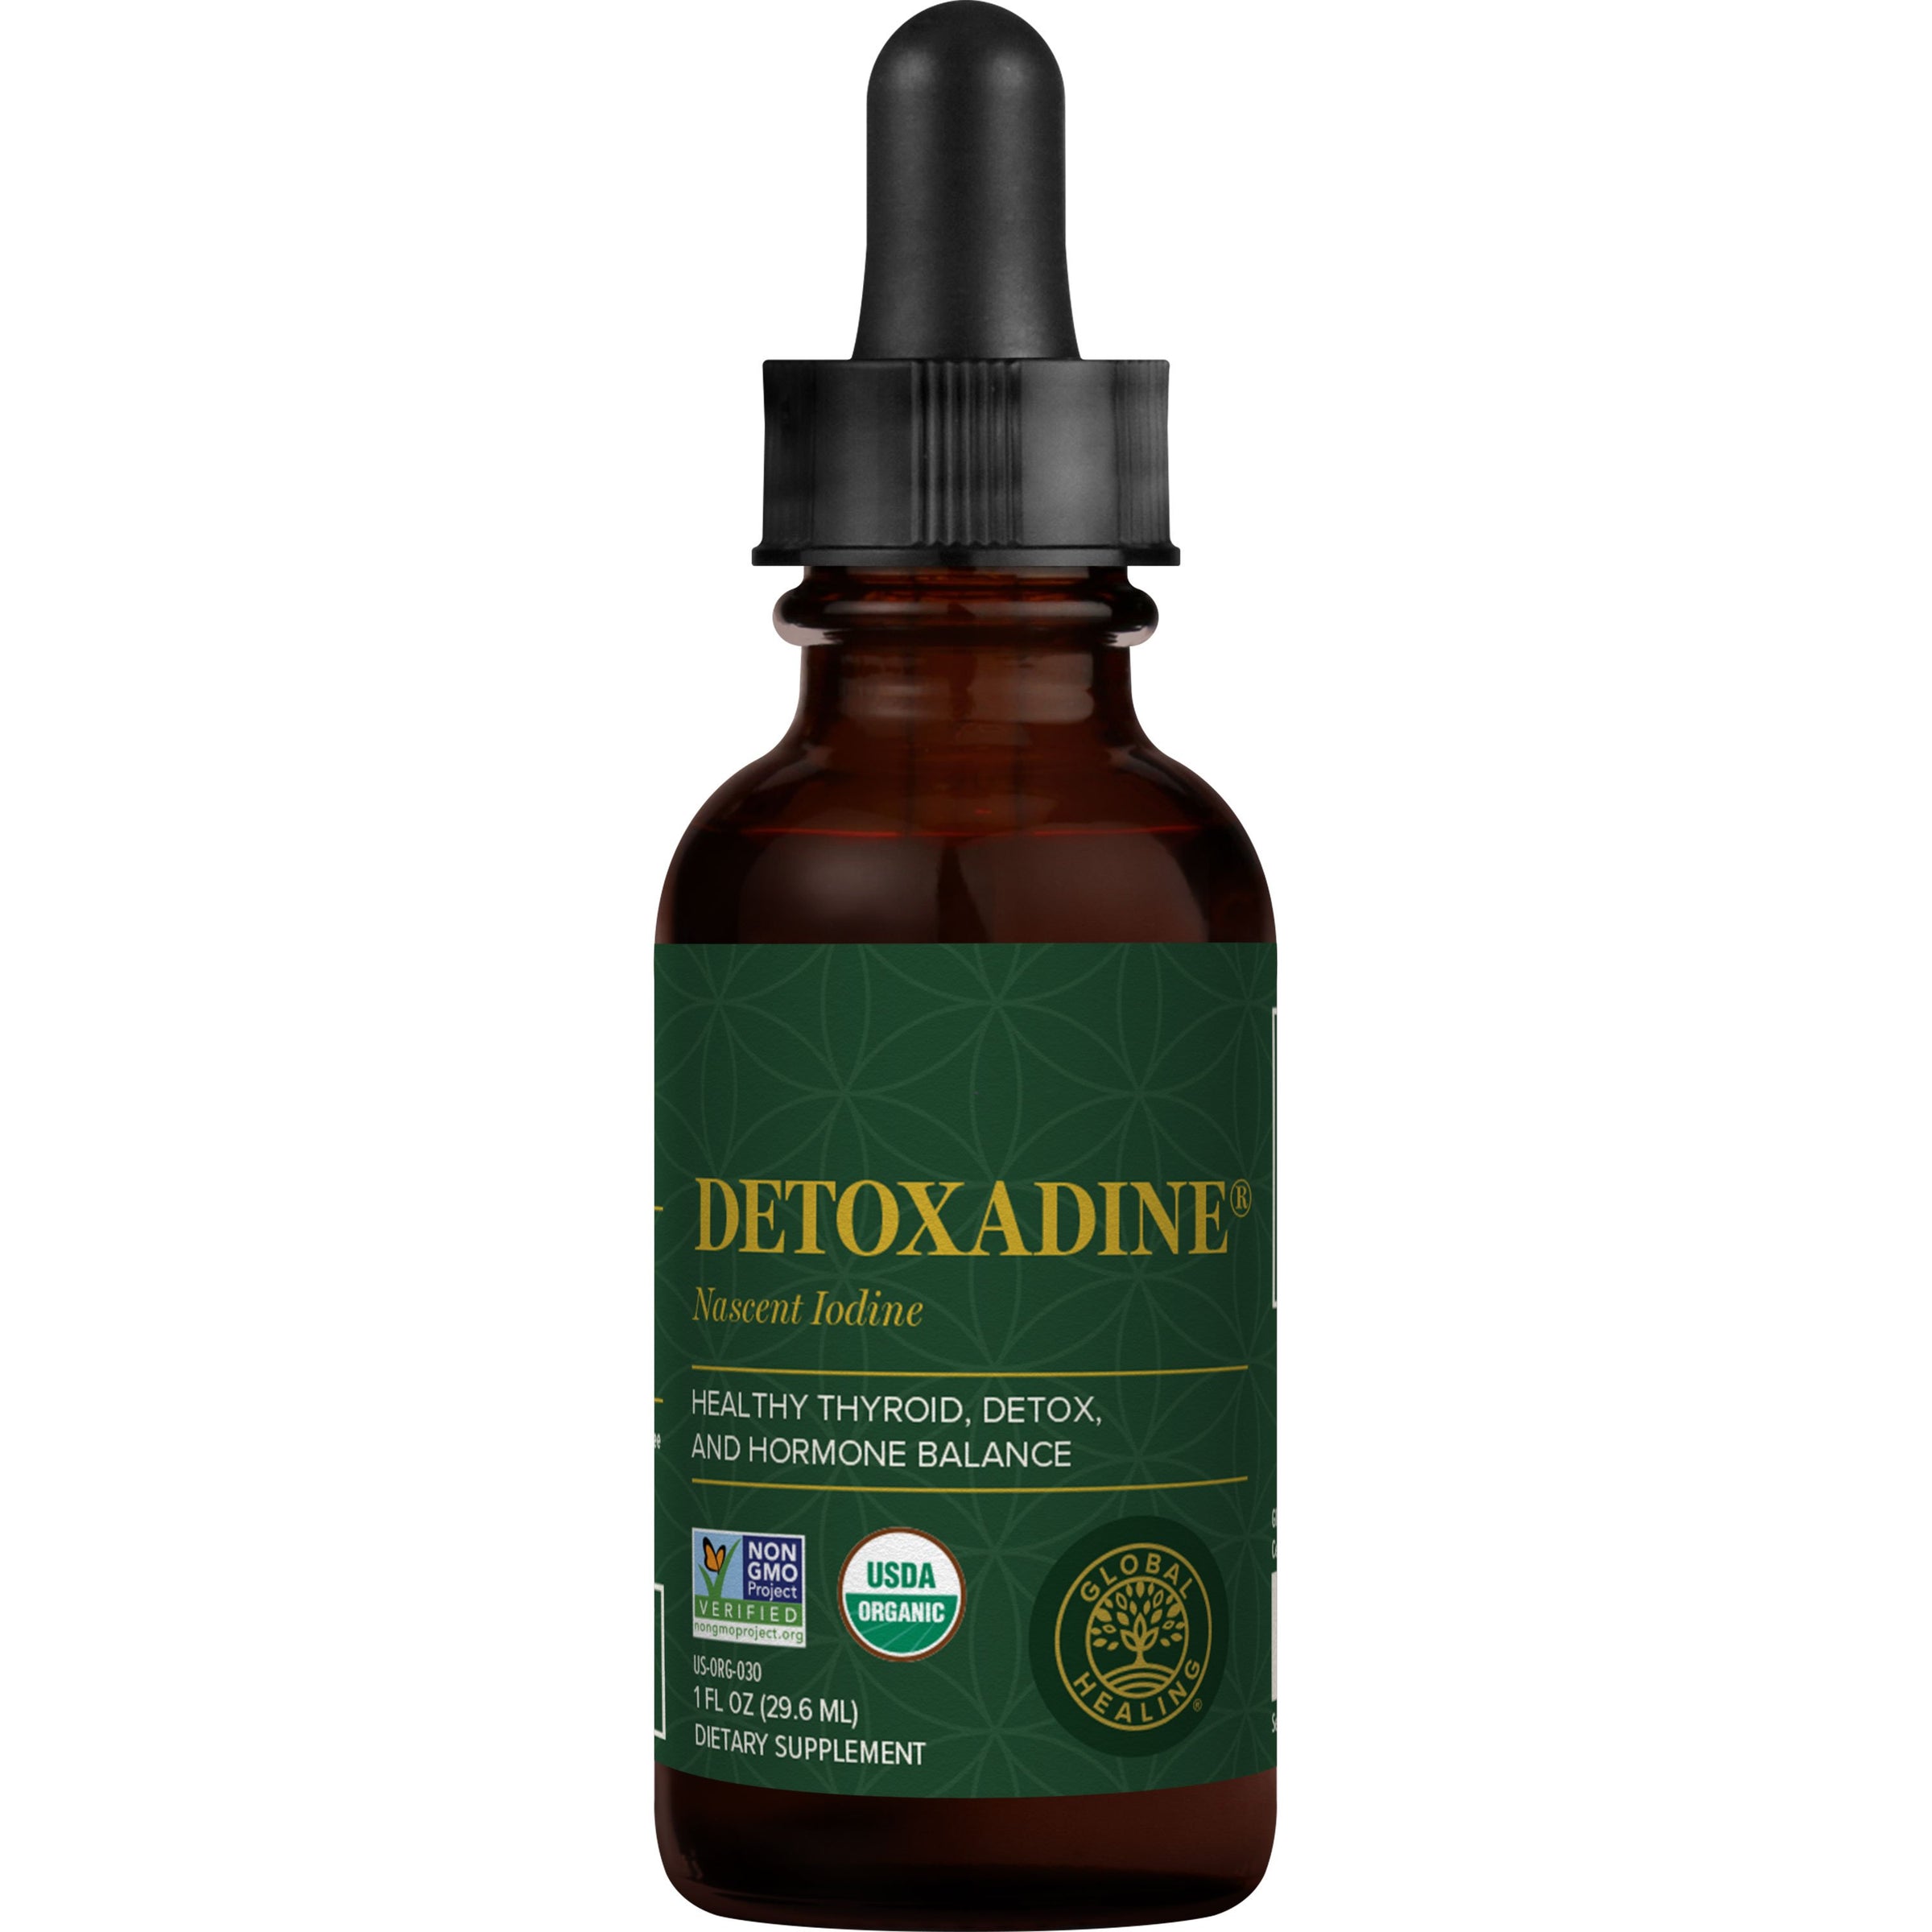 Global Healing Organic Cleanses and Detox Products